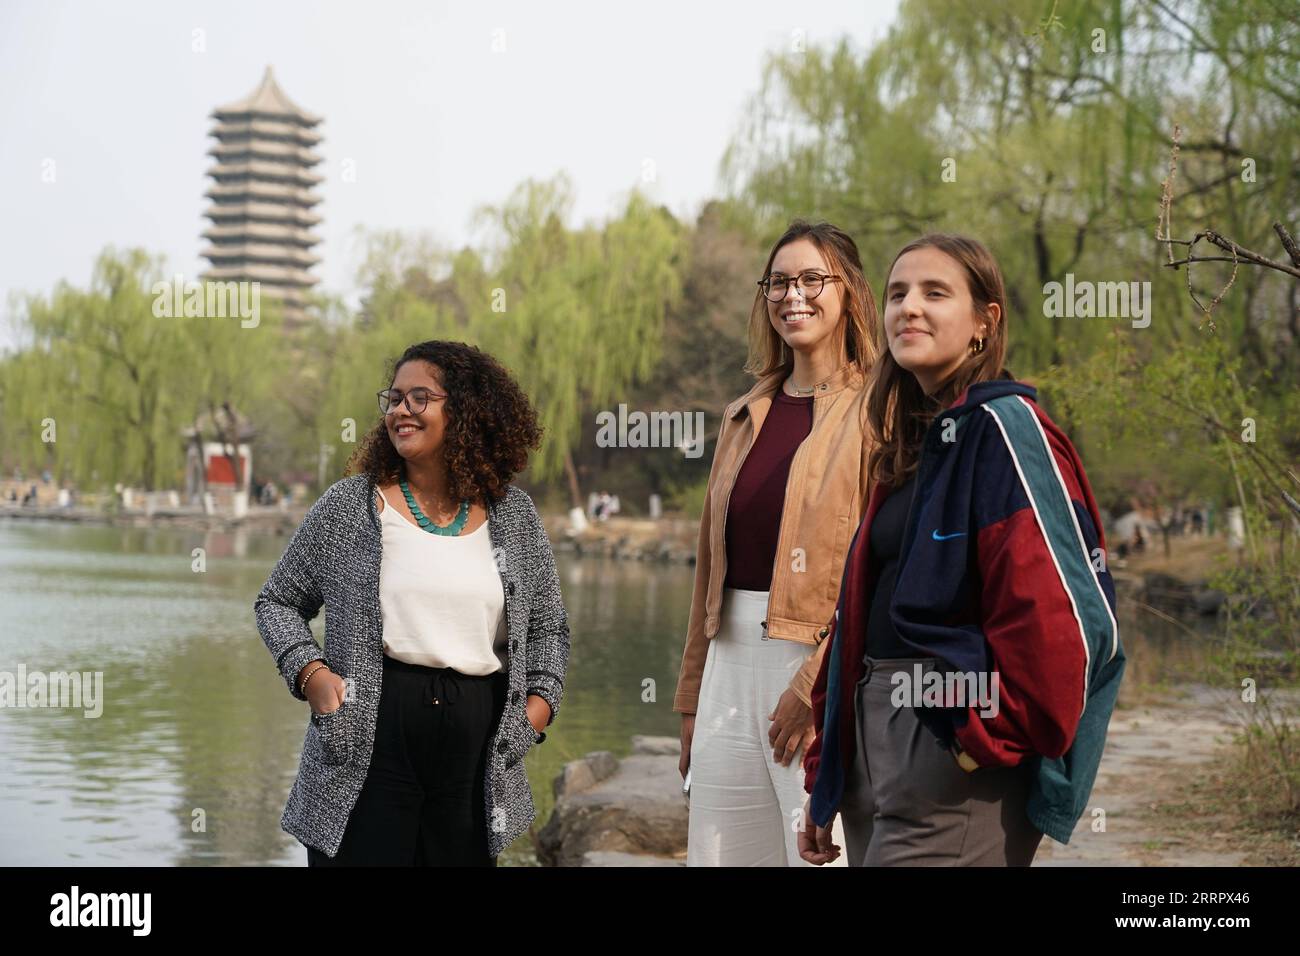 230415 -- BEIJING, April 15, 2023 -- Rafaela L, Manuela C and Maria pose for a photo near the Weiming Lake of Peking University in Beijing, capital of China, March 31, 2023. Maria Eduarda Variani, Rafaela Viana dos Santos, Manuela Boiteux Pestana, and Marco Andre Rocha Germano are Brazilian students studying in the Master of China Studies program at the Yenching Academy of Peking University in China. The four of them have been interested in Chinese culture since they were young. After arriving in Beijing, they have been impressed by the Chinese capital s profound cultural heritage, convenient Stock Photo